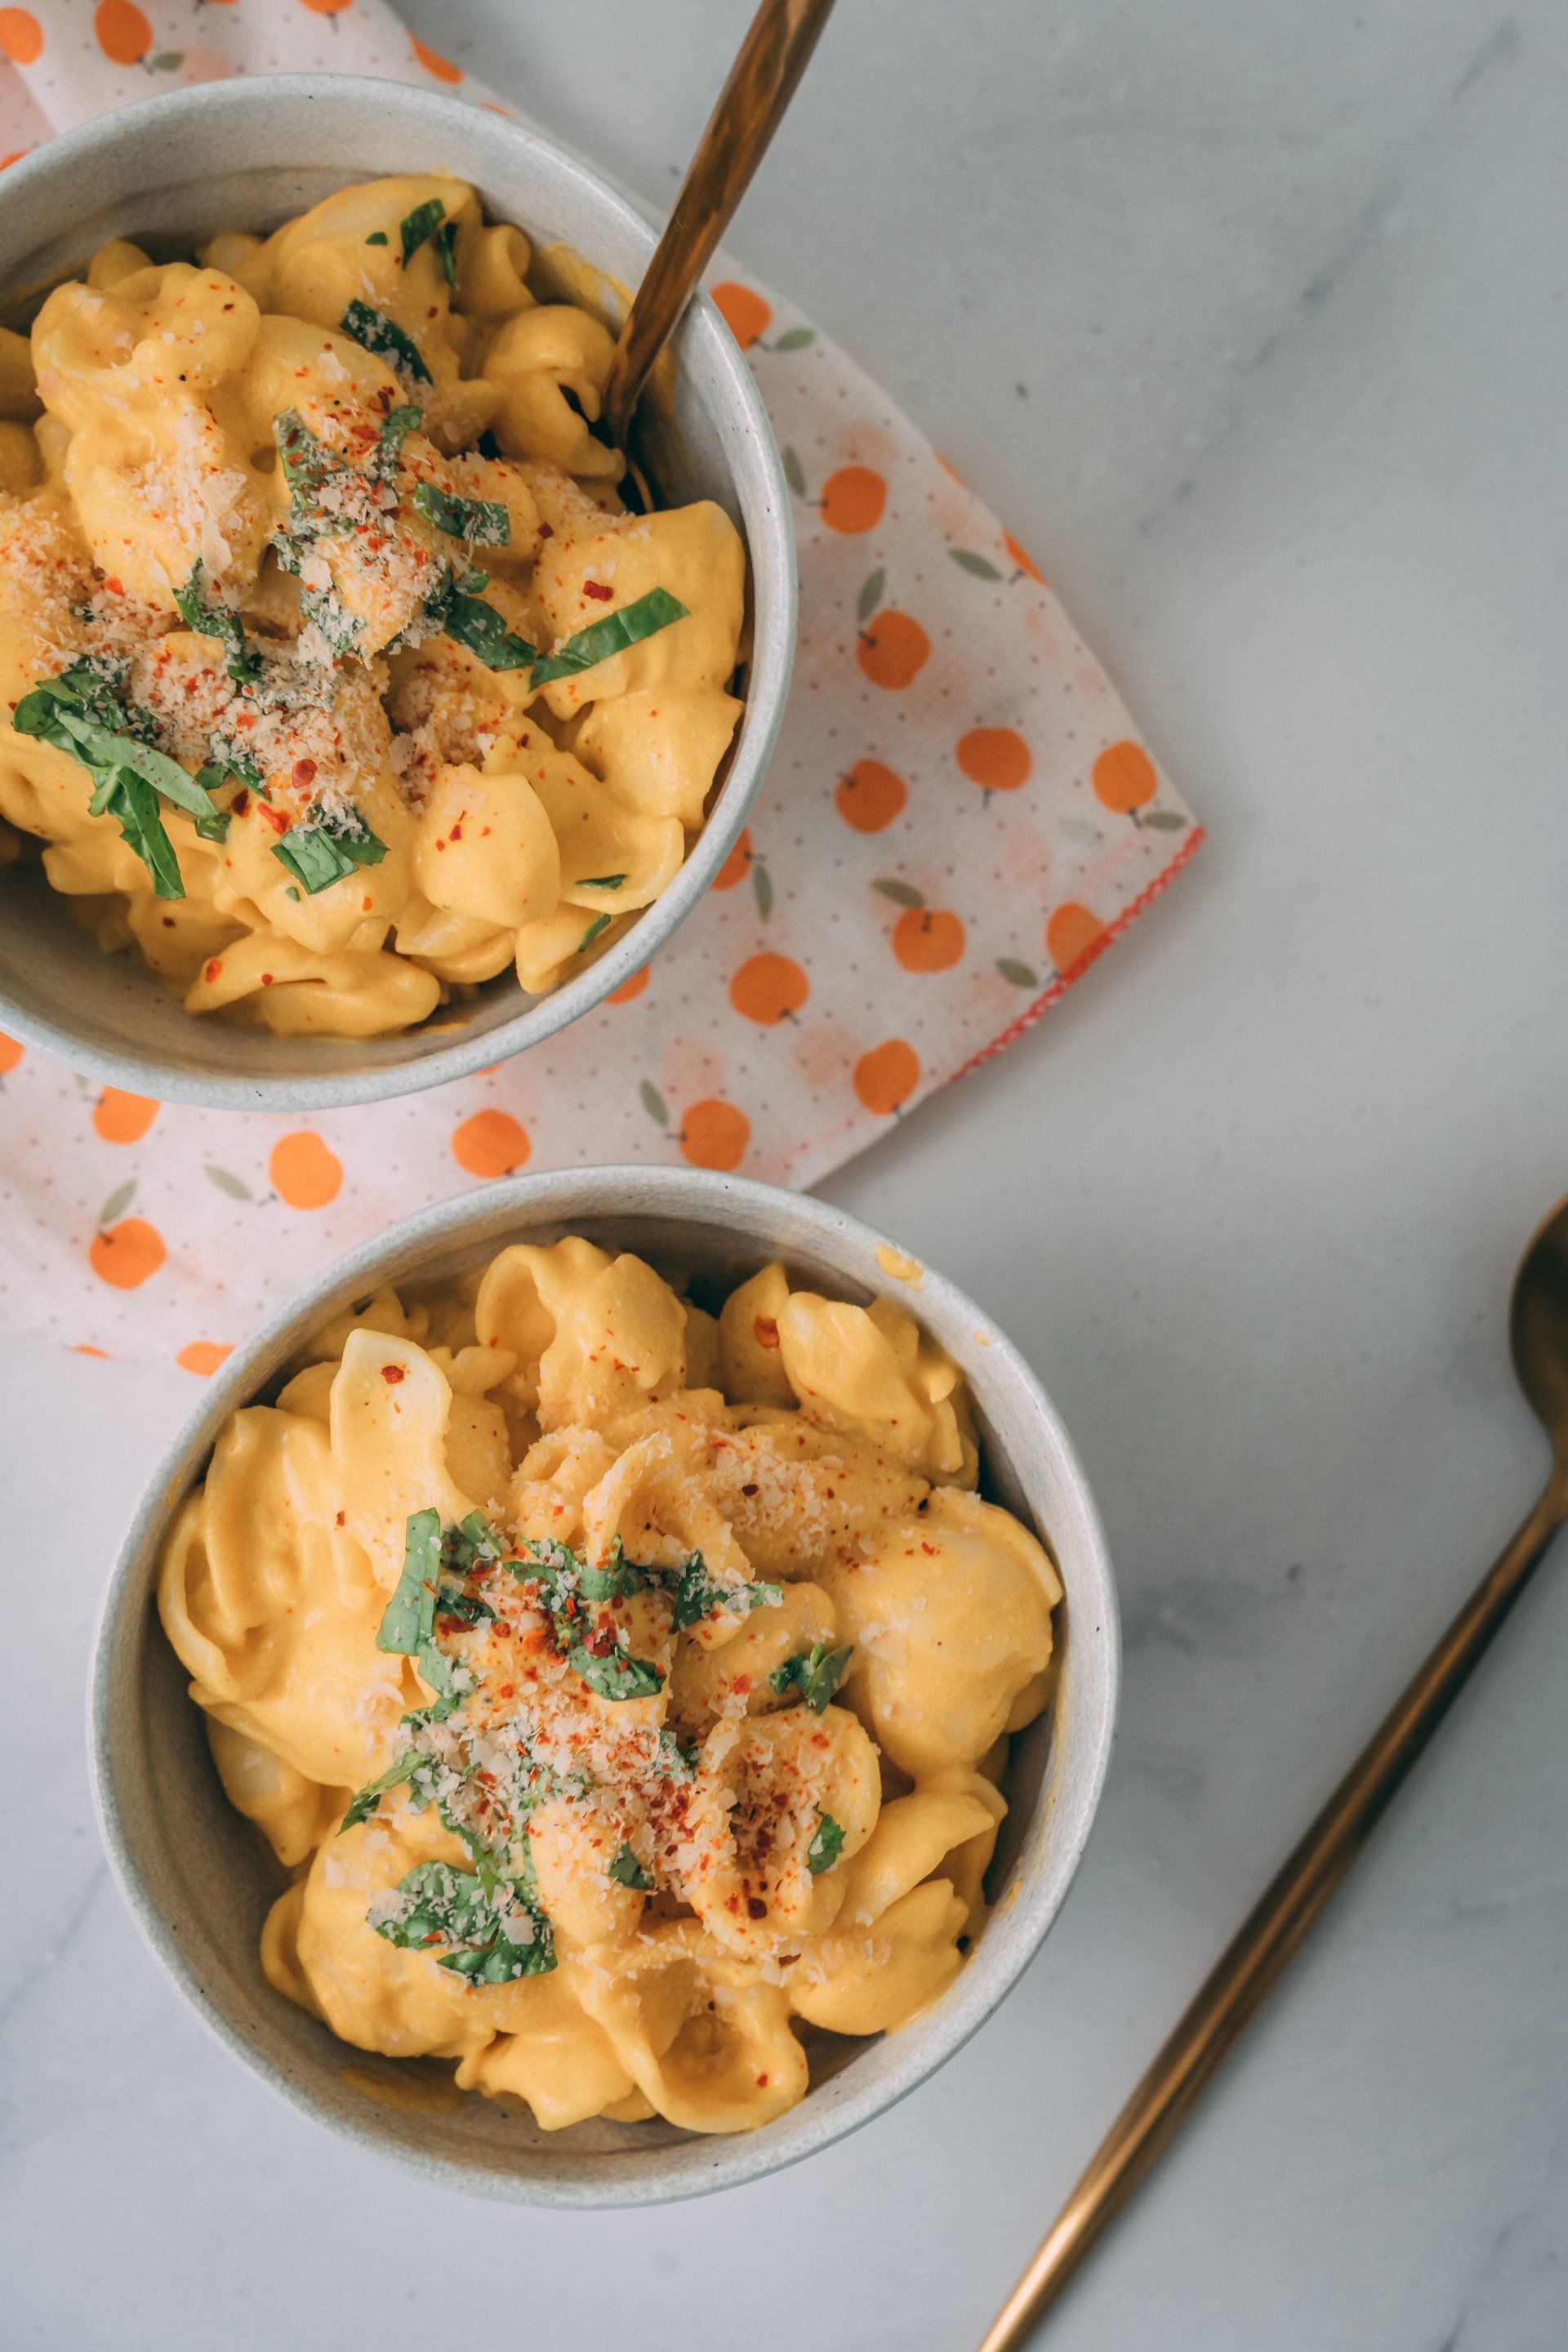 Two bowls of macaroni and cheese with spoons on a table.